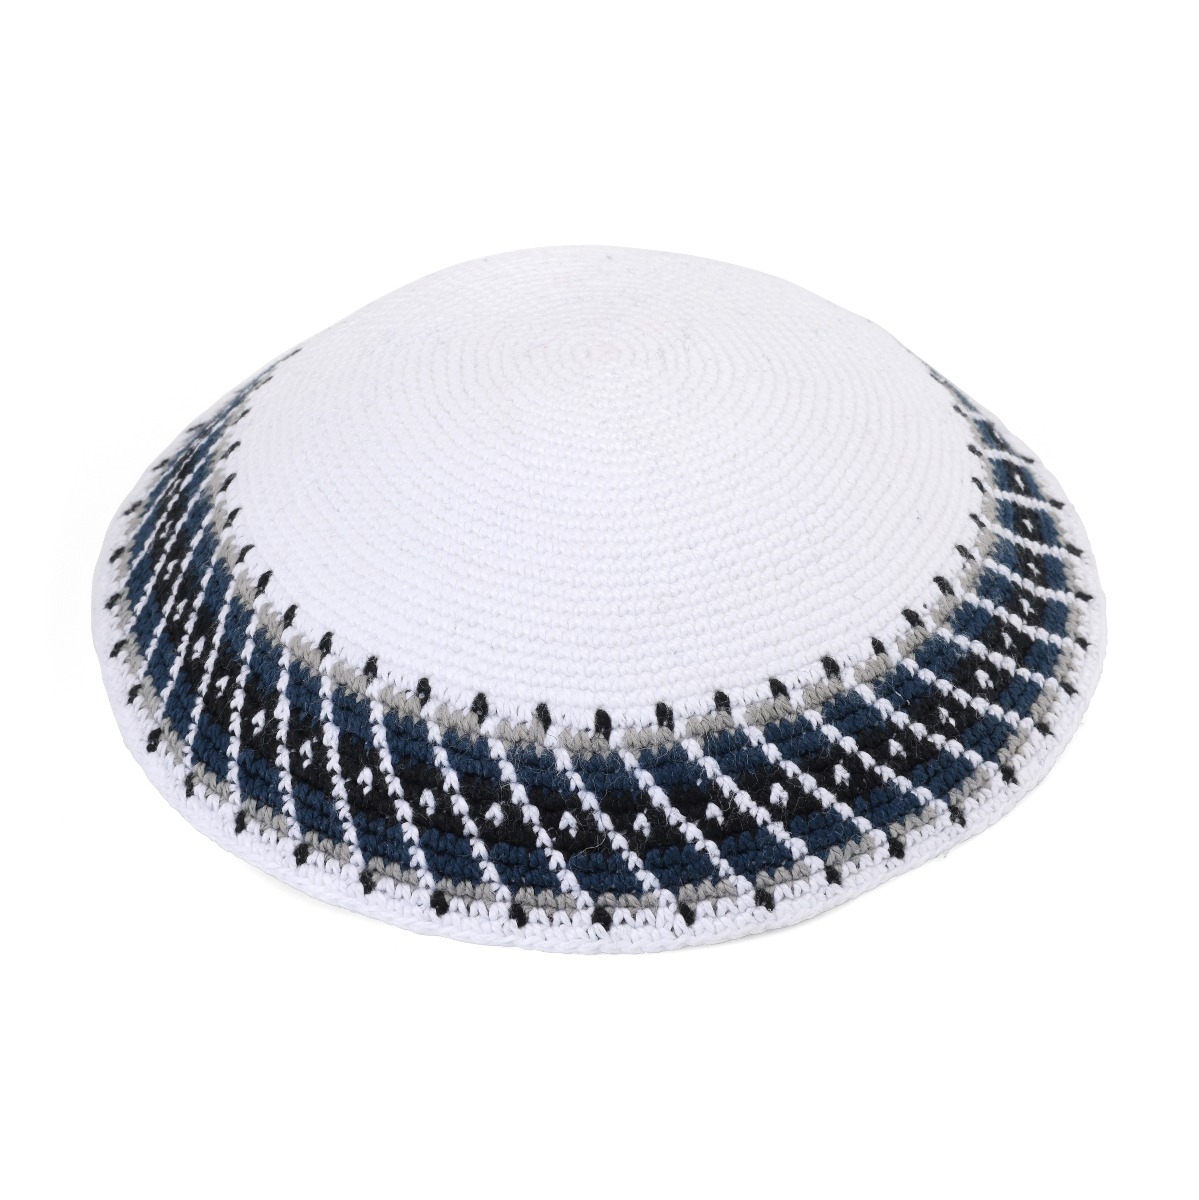 High-Quality Knitted White Kippah with Colorful Border (Large) - 1